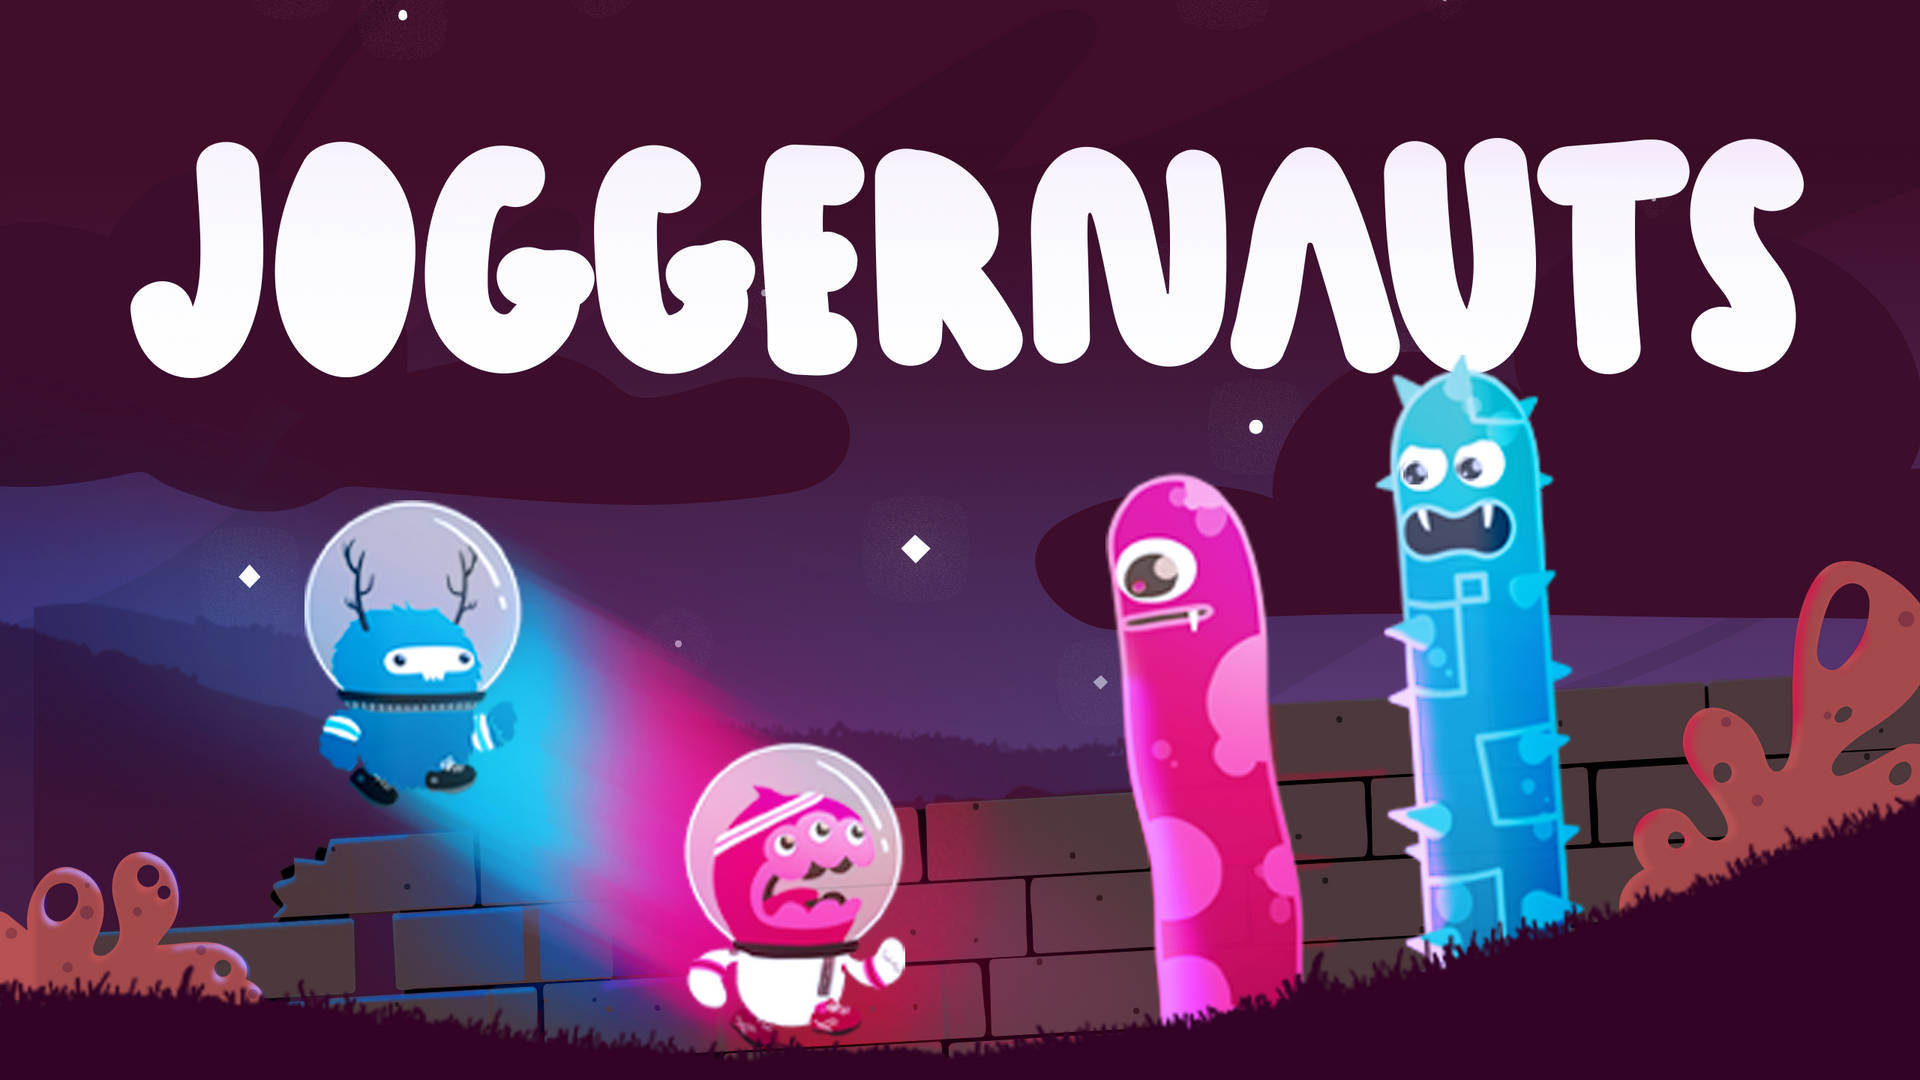 Joggernauts Players Counterpart Worms Background